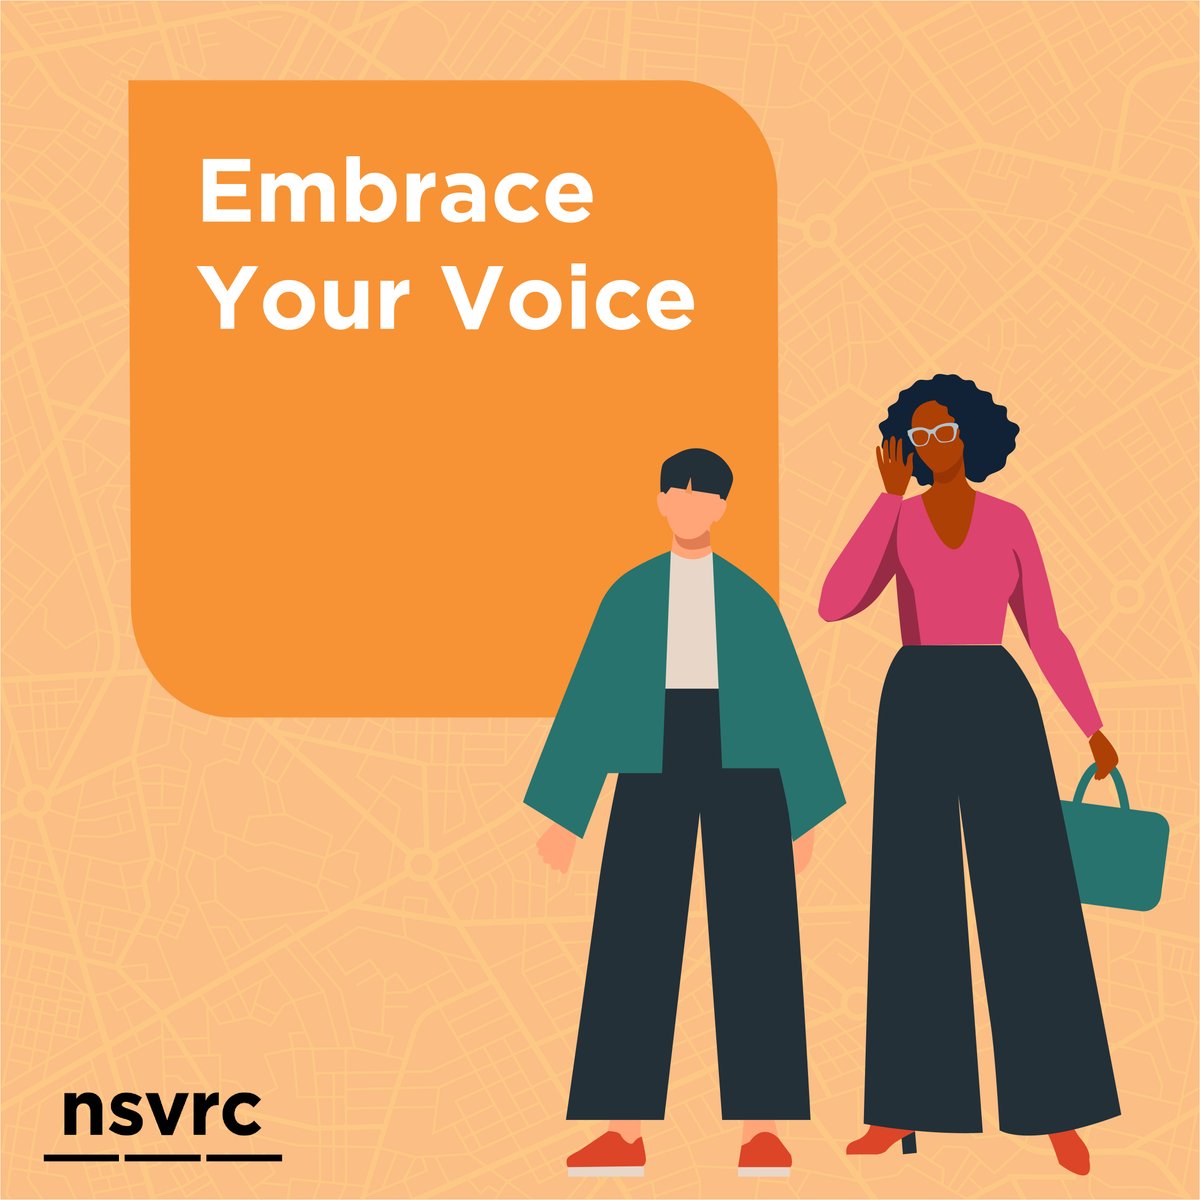 Racism, sexism, classism, heterosexism, ageism, ableism, and other forms of oppression contribute to higher rates of sexual violence. We must strive to create communities that are safe, equitable, and inclusive. Learn more @NSVRC. #SAAM2024 #ConnectedCommunites